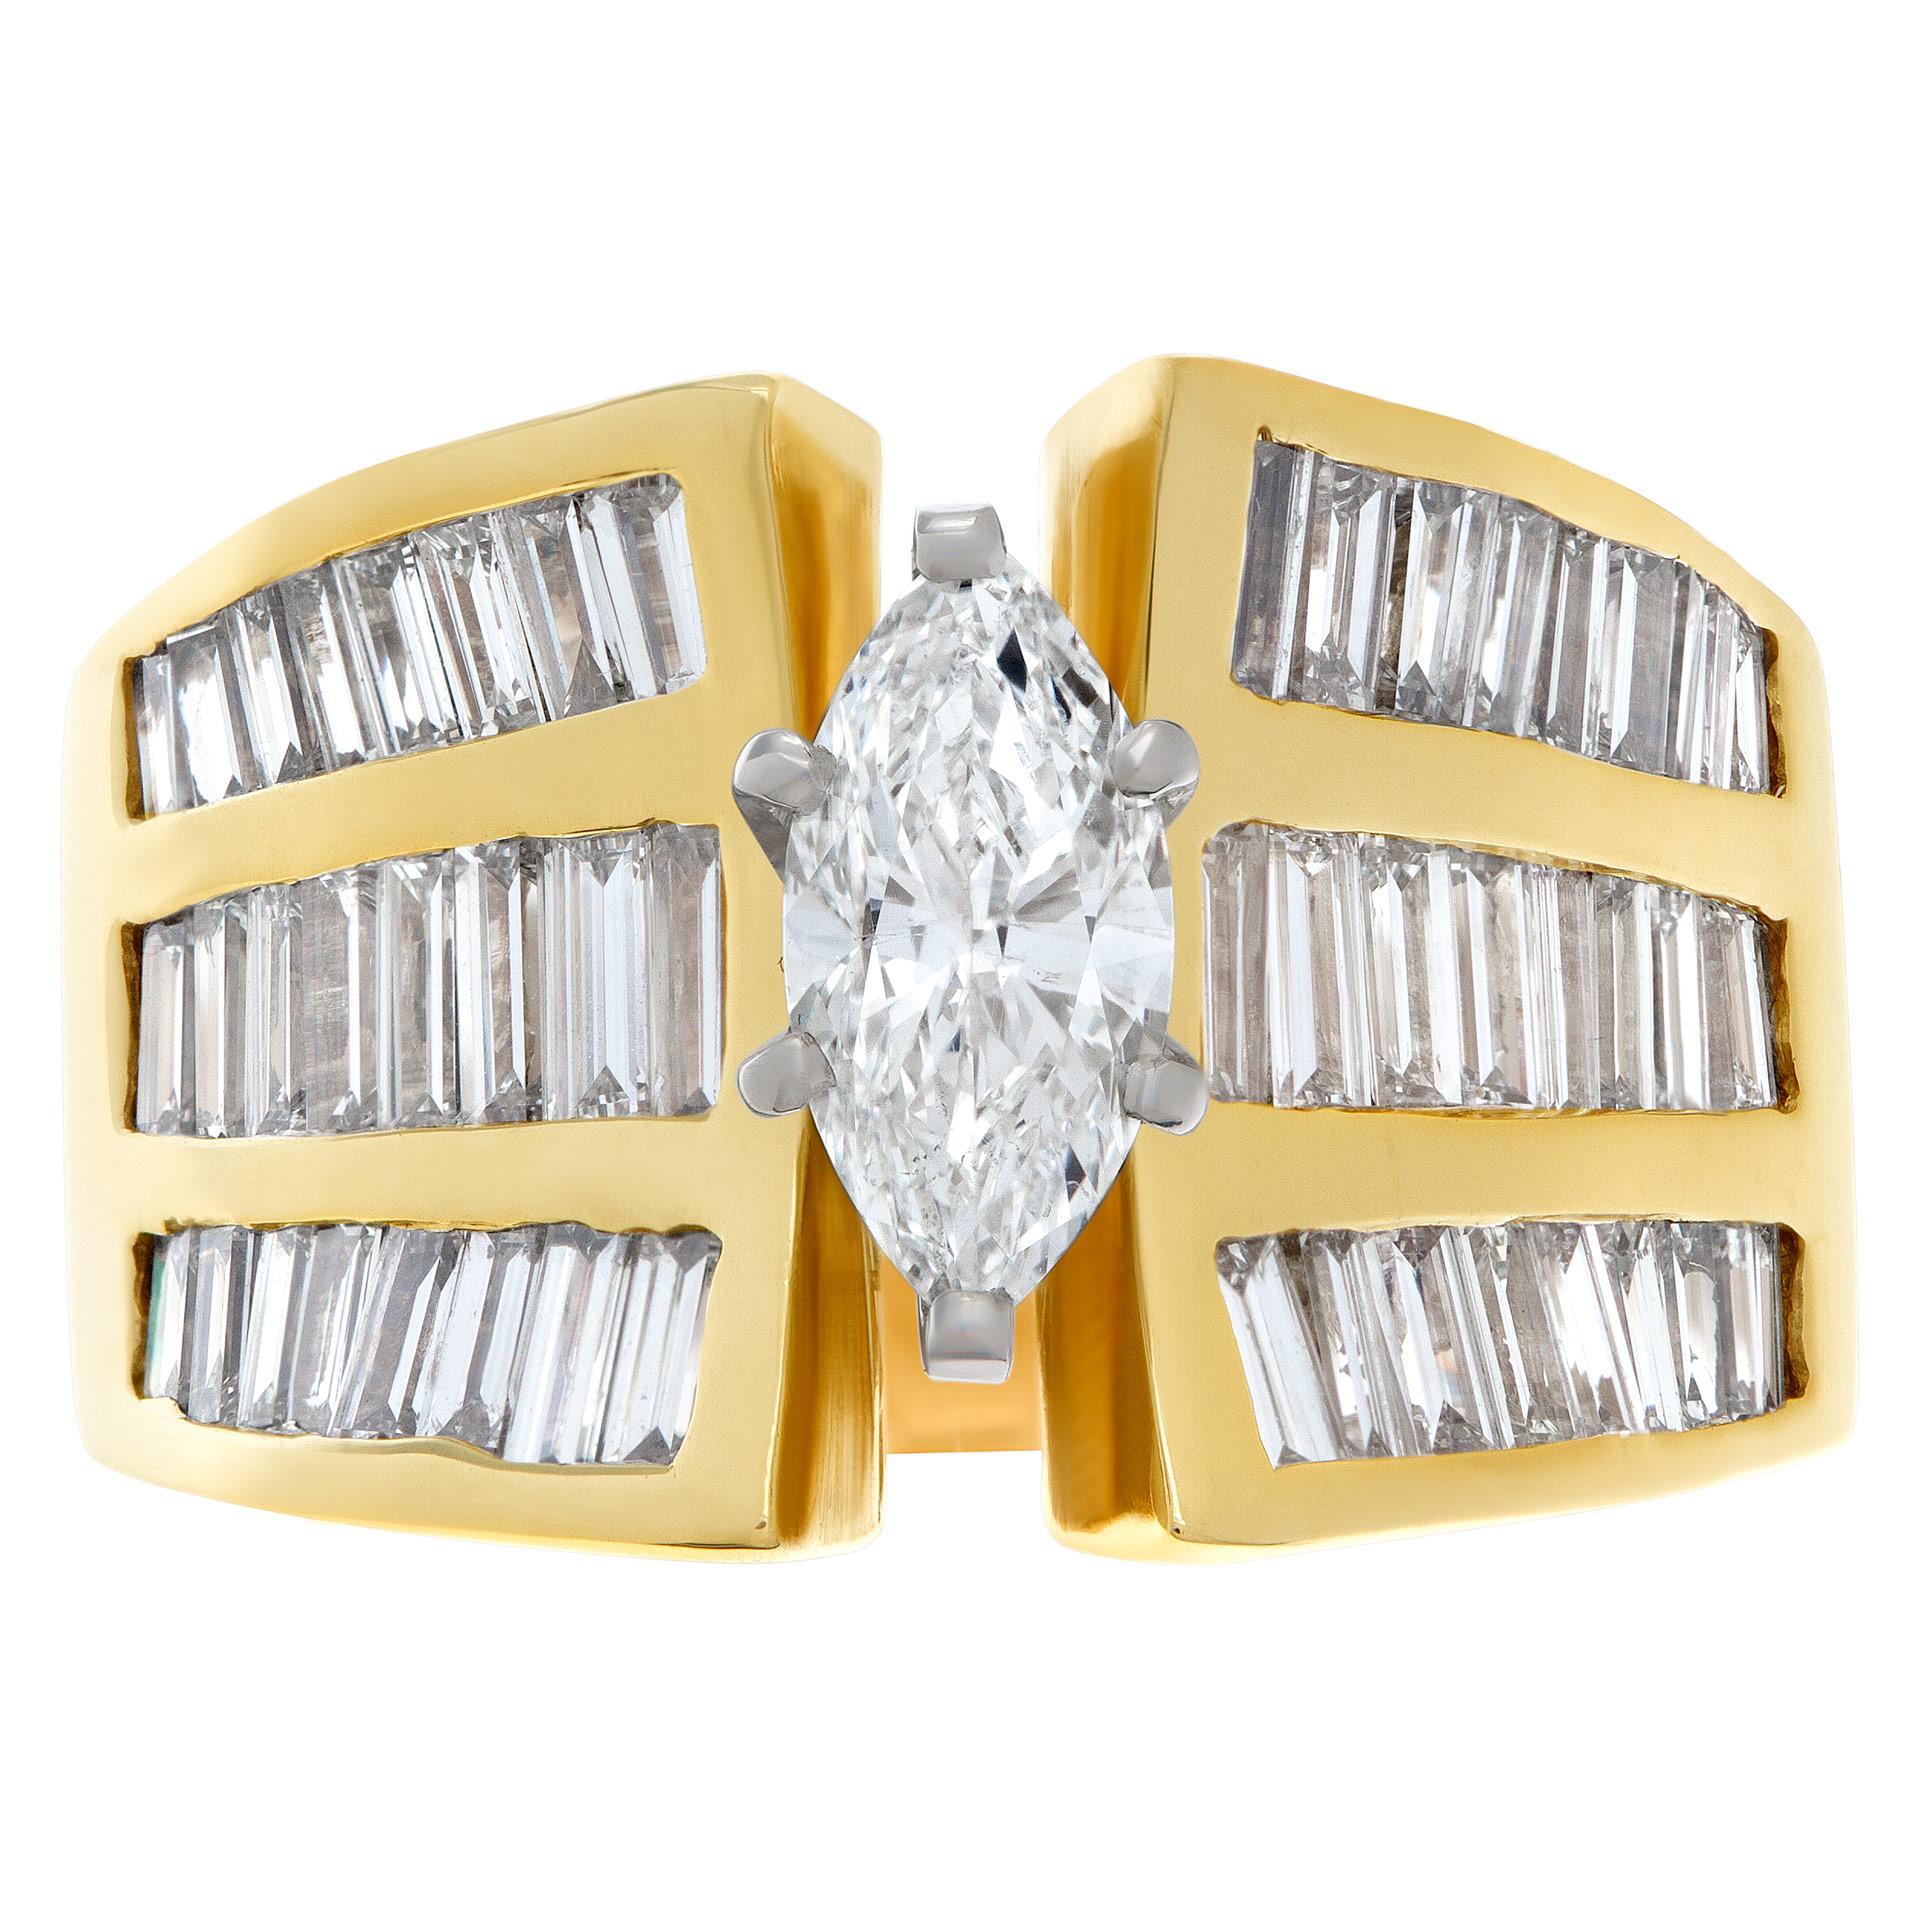 GIA report certified marquise diamond 0.93 carat (G color, SI1 clarity) ring set in a 18k yellow gold setting with app 2.50 carat baguette diamond; size 8.5 This GIA report certified ring is currently size 8.5 and some items can be sized up or down,